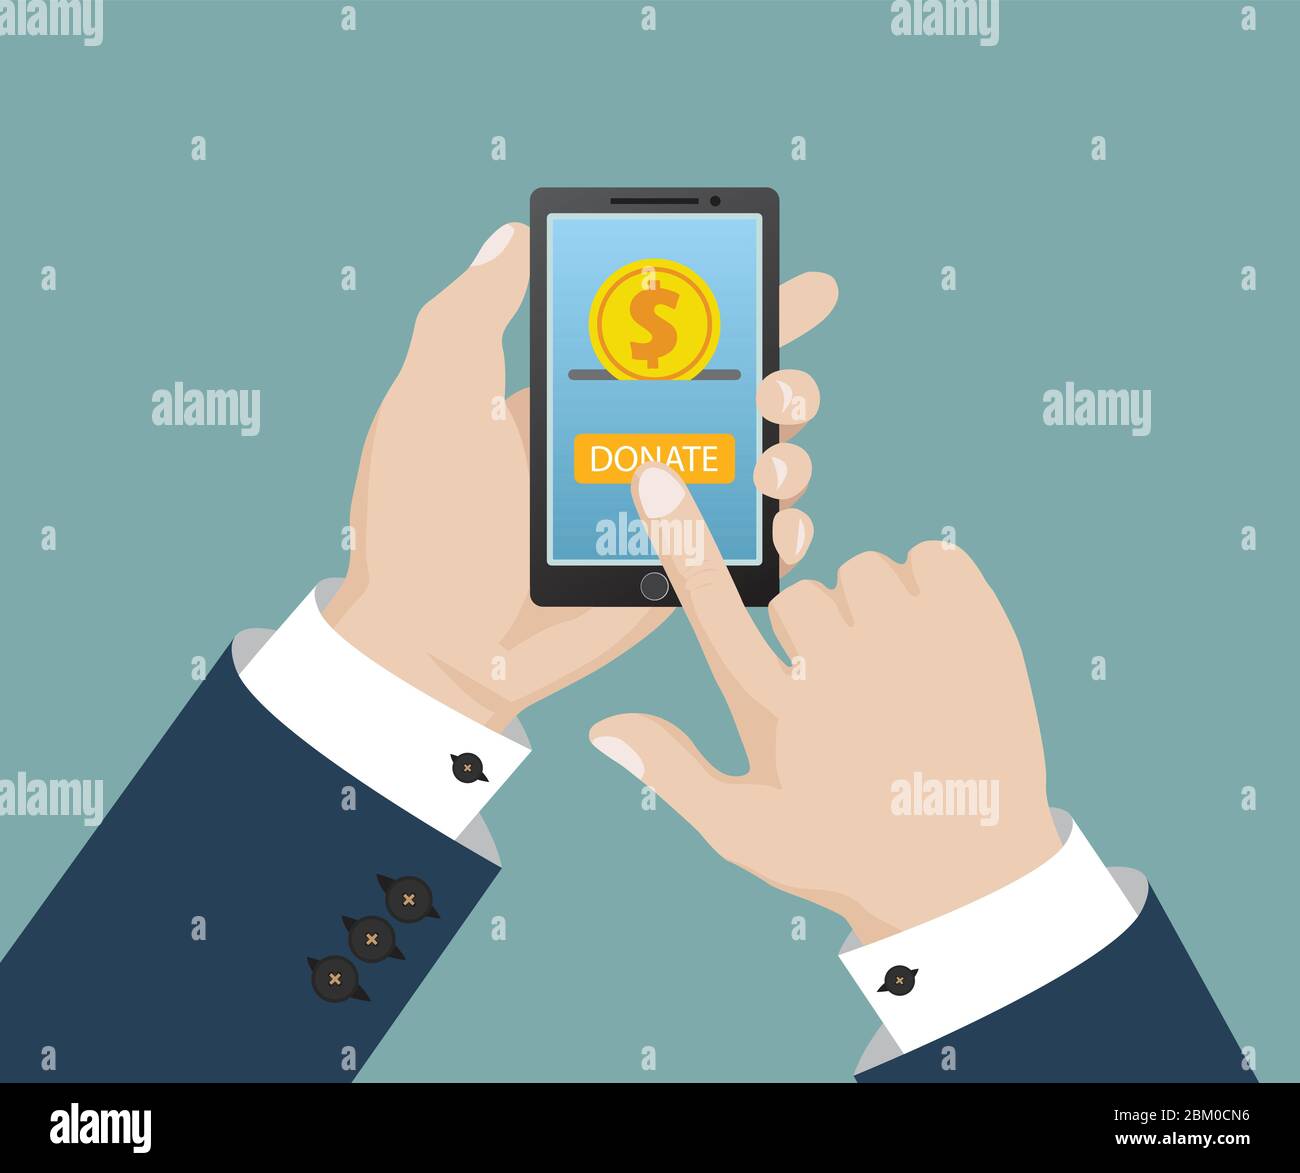 Donate online concept. Gold coin and donate button on smartphone screen. Human hand holding smartphone. Vector illustration in flat design Stock Vector